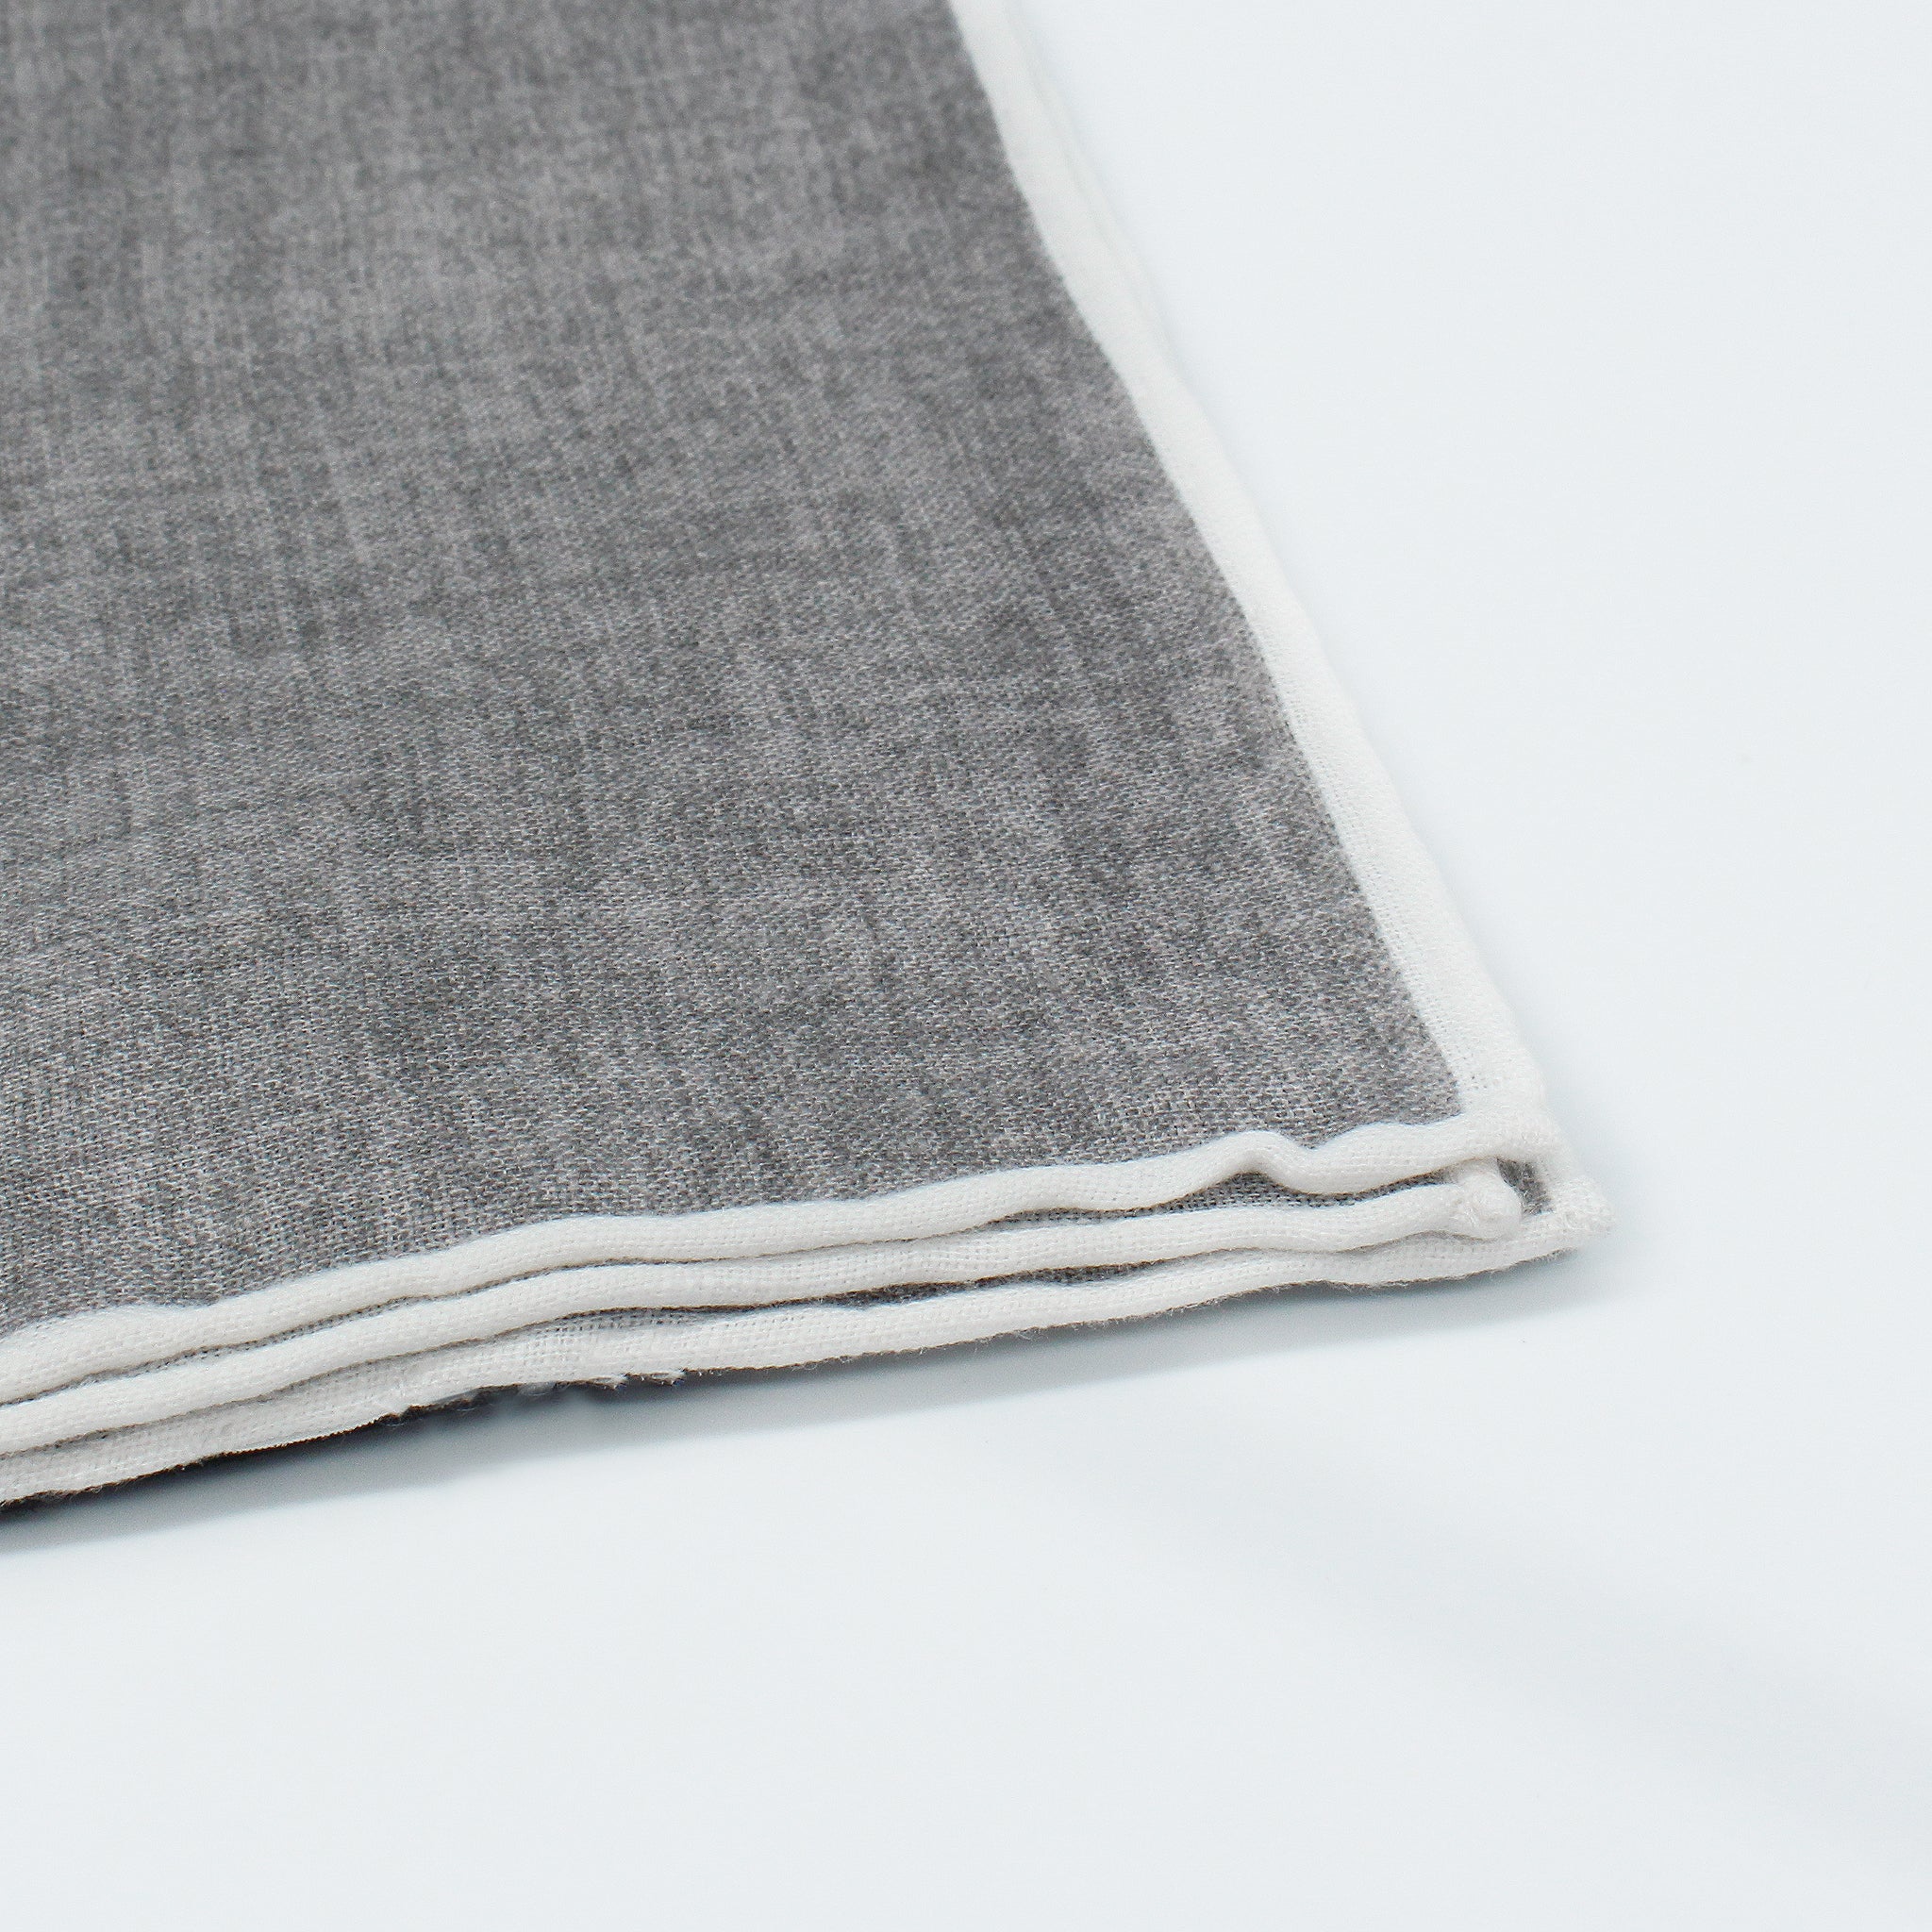 Linen pocket square with gray background and white border